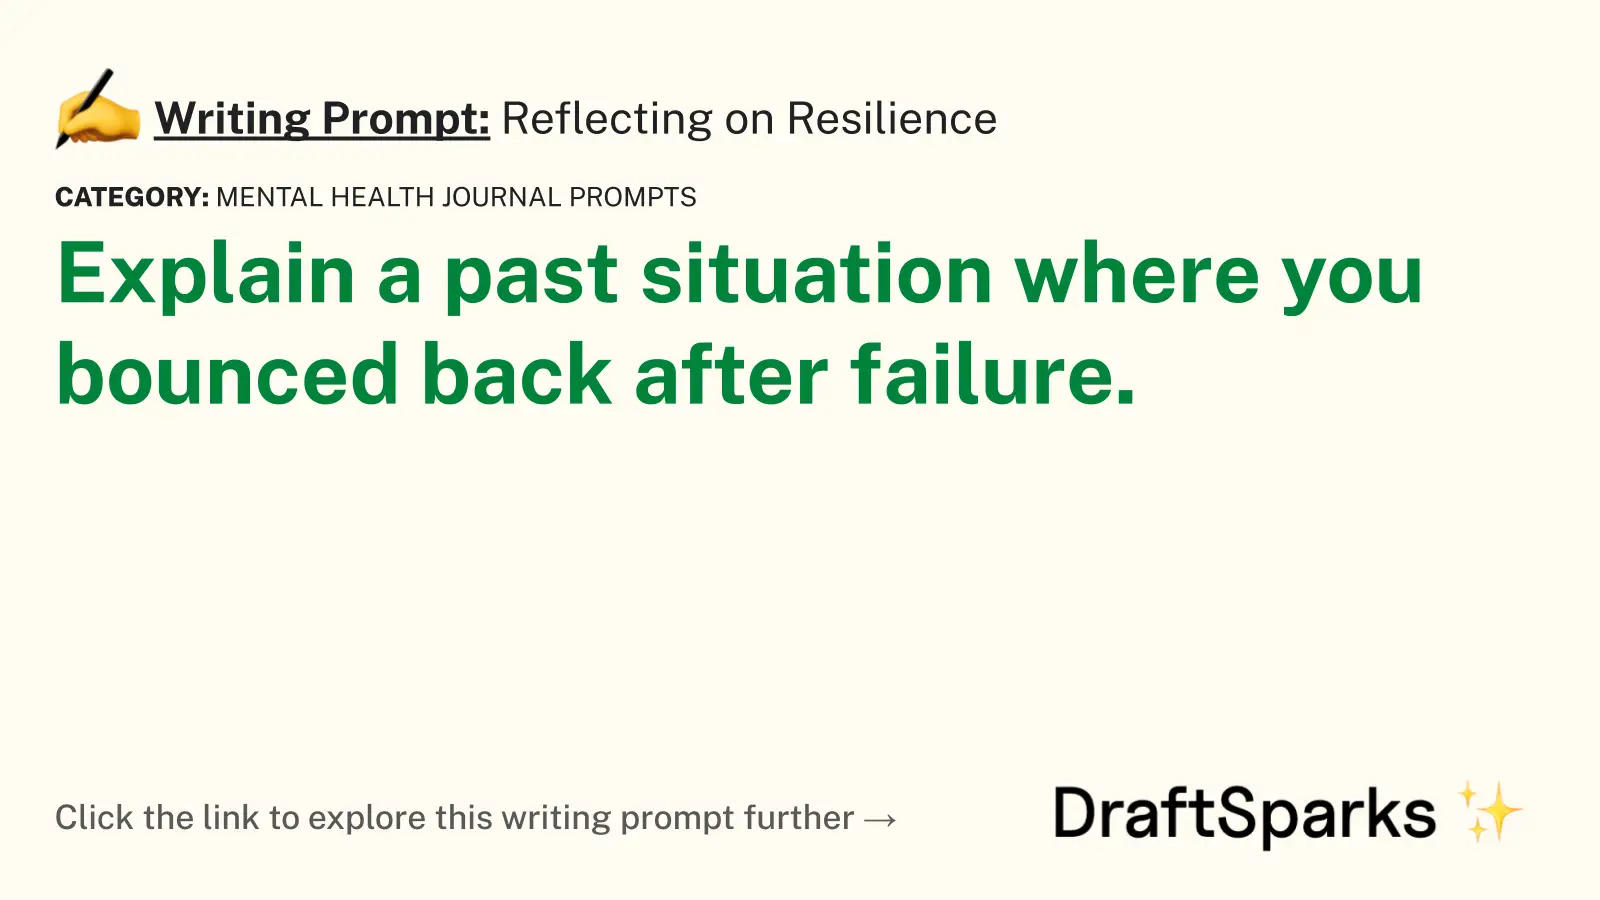 Reflecting on Resilience